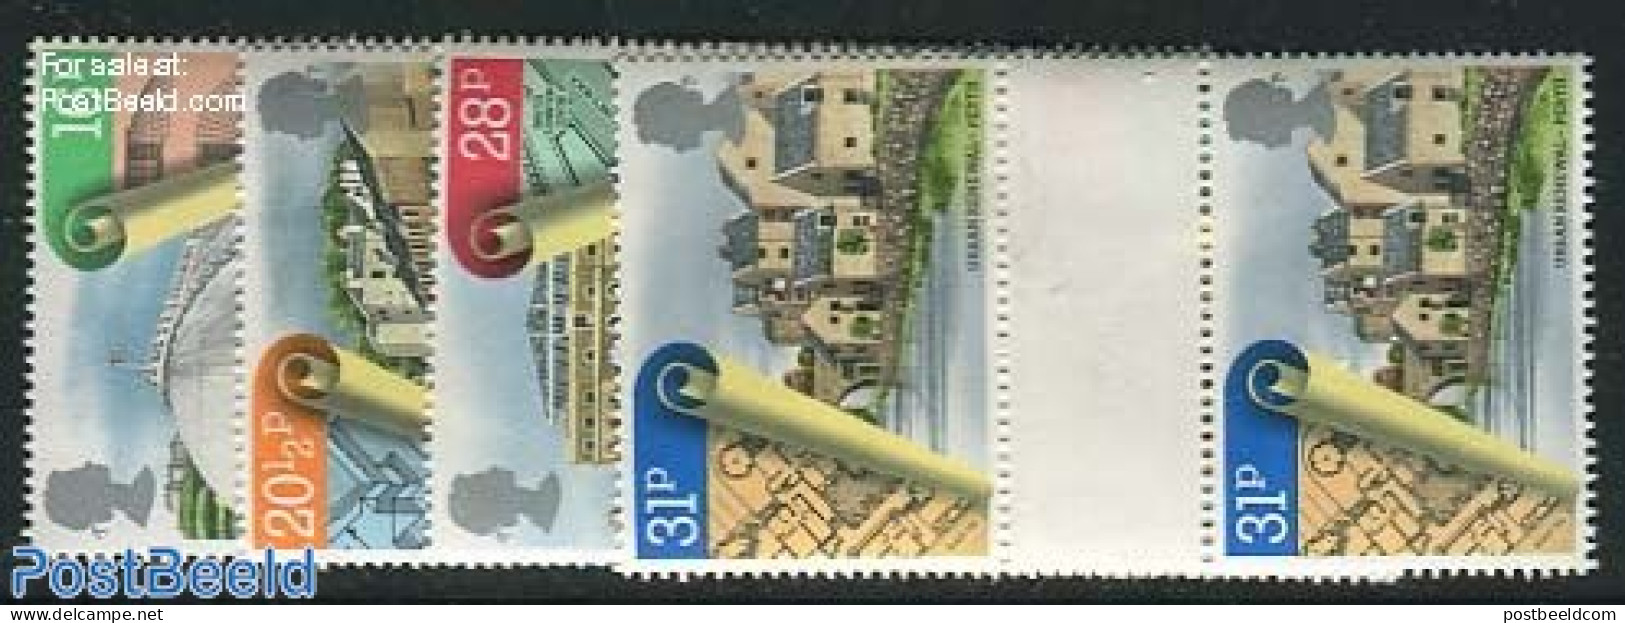 Great Britain 1984 City Renewals 4v Gutter Pairs, Mint NH, Nature - Various - Gardens - Maps - Art - Modern Architecture - Unused Stamps